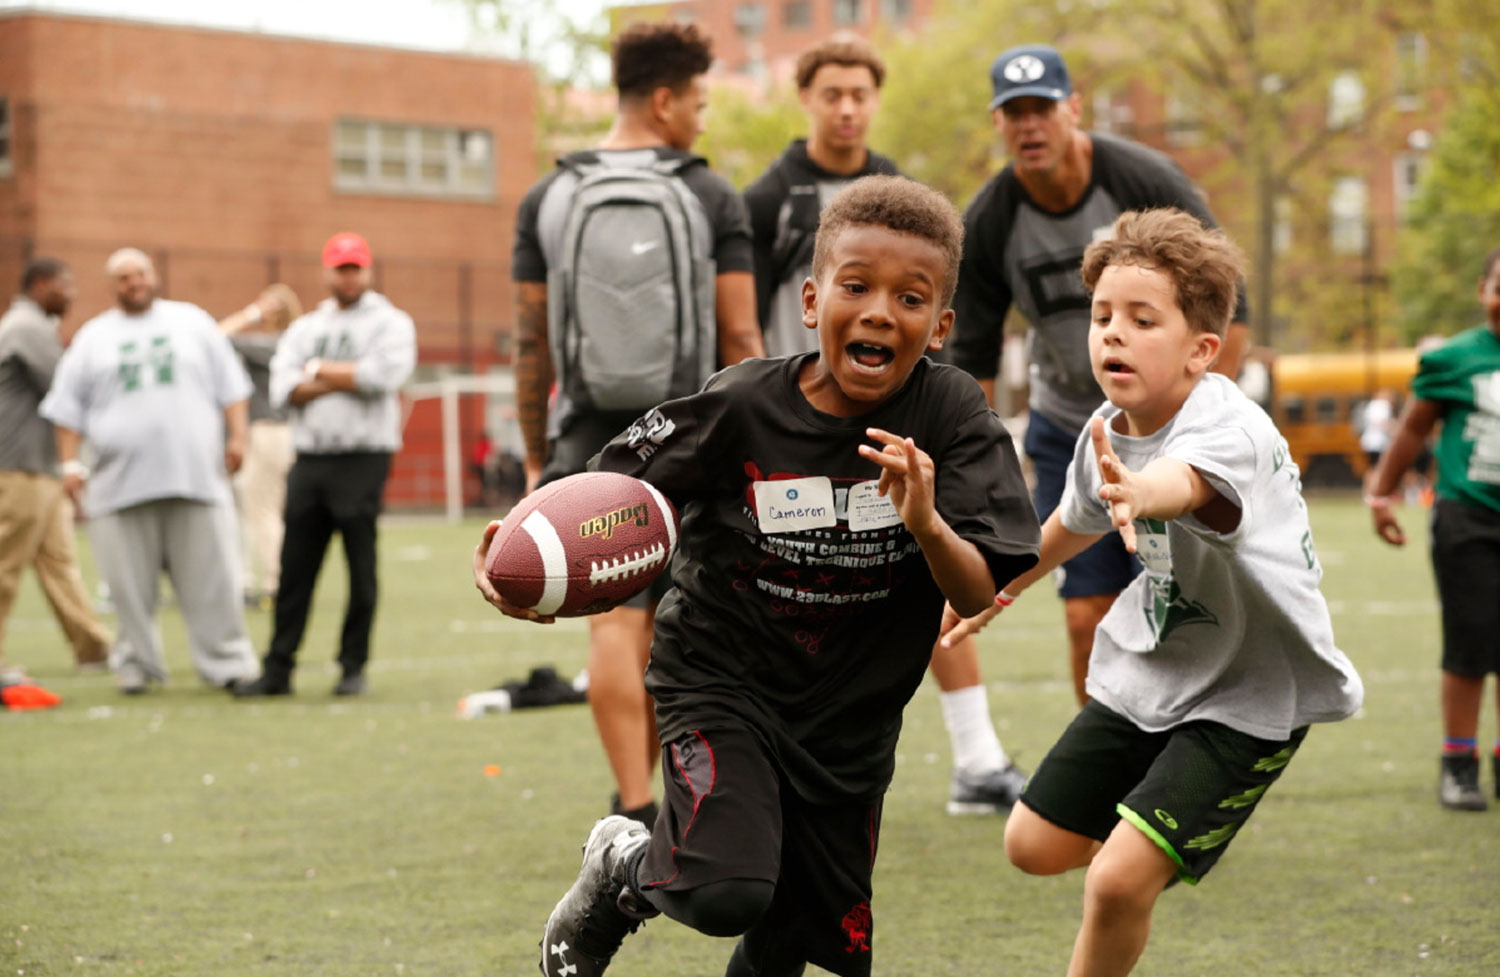 A camp participant takes off with the football under arm.